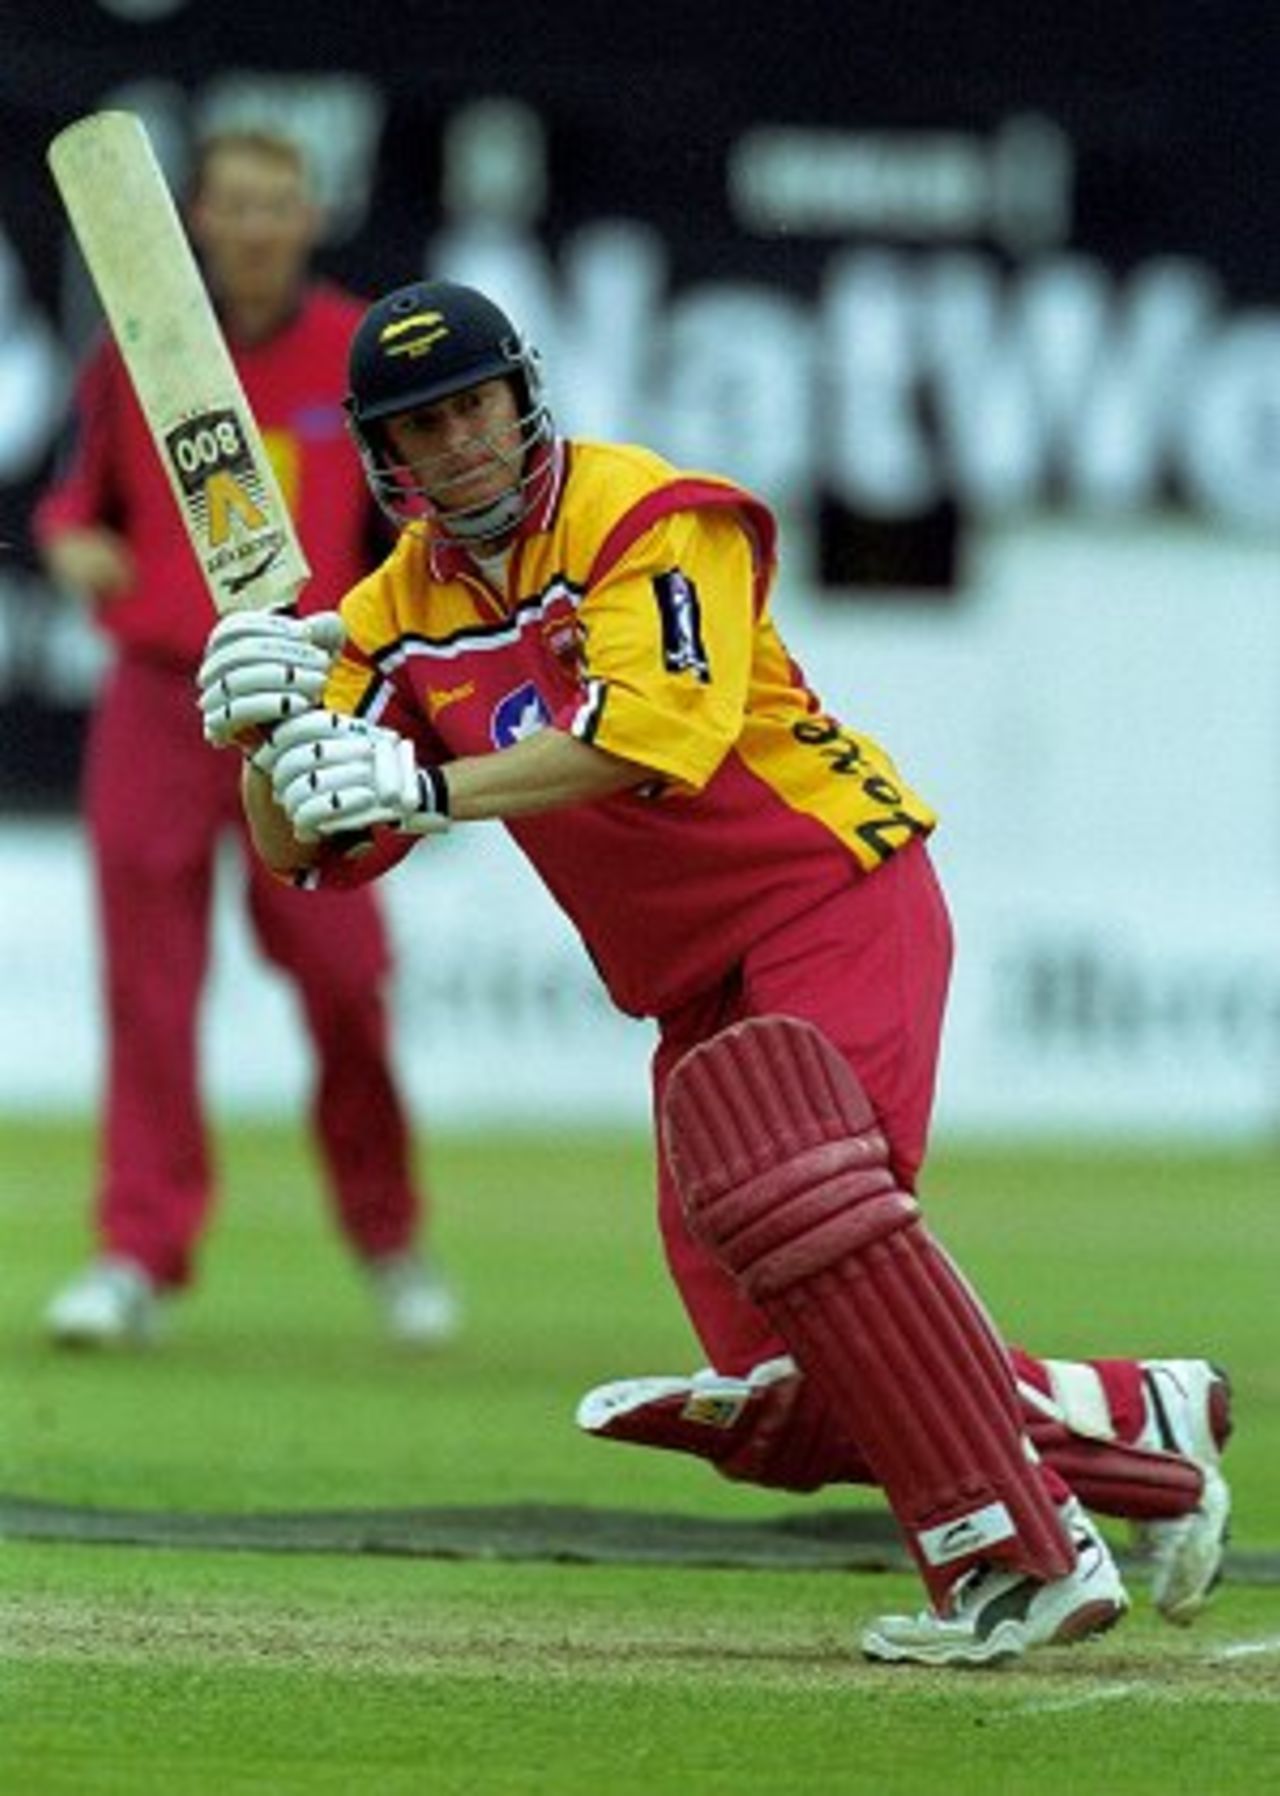 23 Jul 2000: Ben Smith of Leicestershire Foxes on his way to 54 not out against Lancashire Lightning in the Norwich Union NCL Division One match at Leicester.